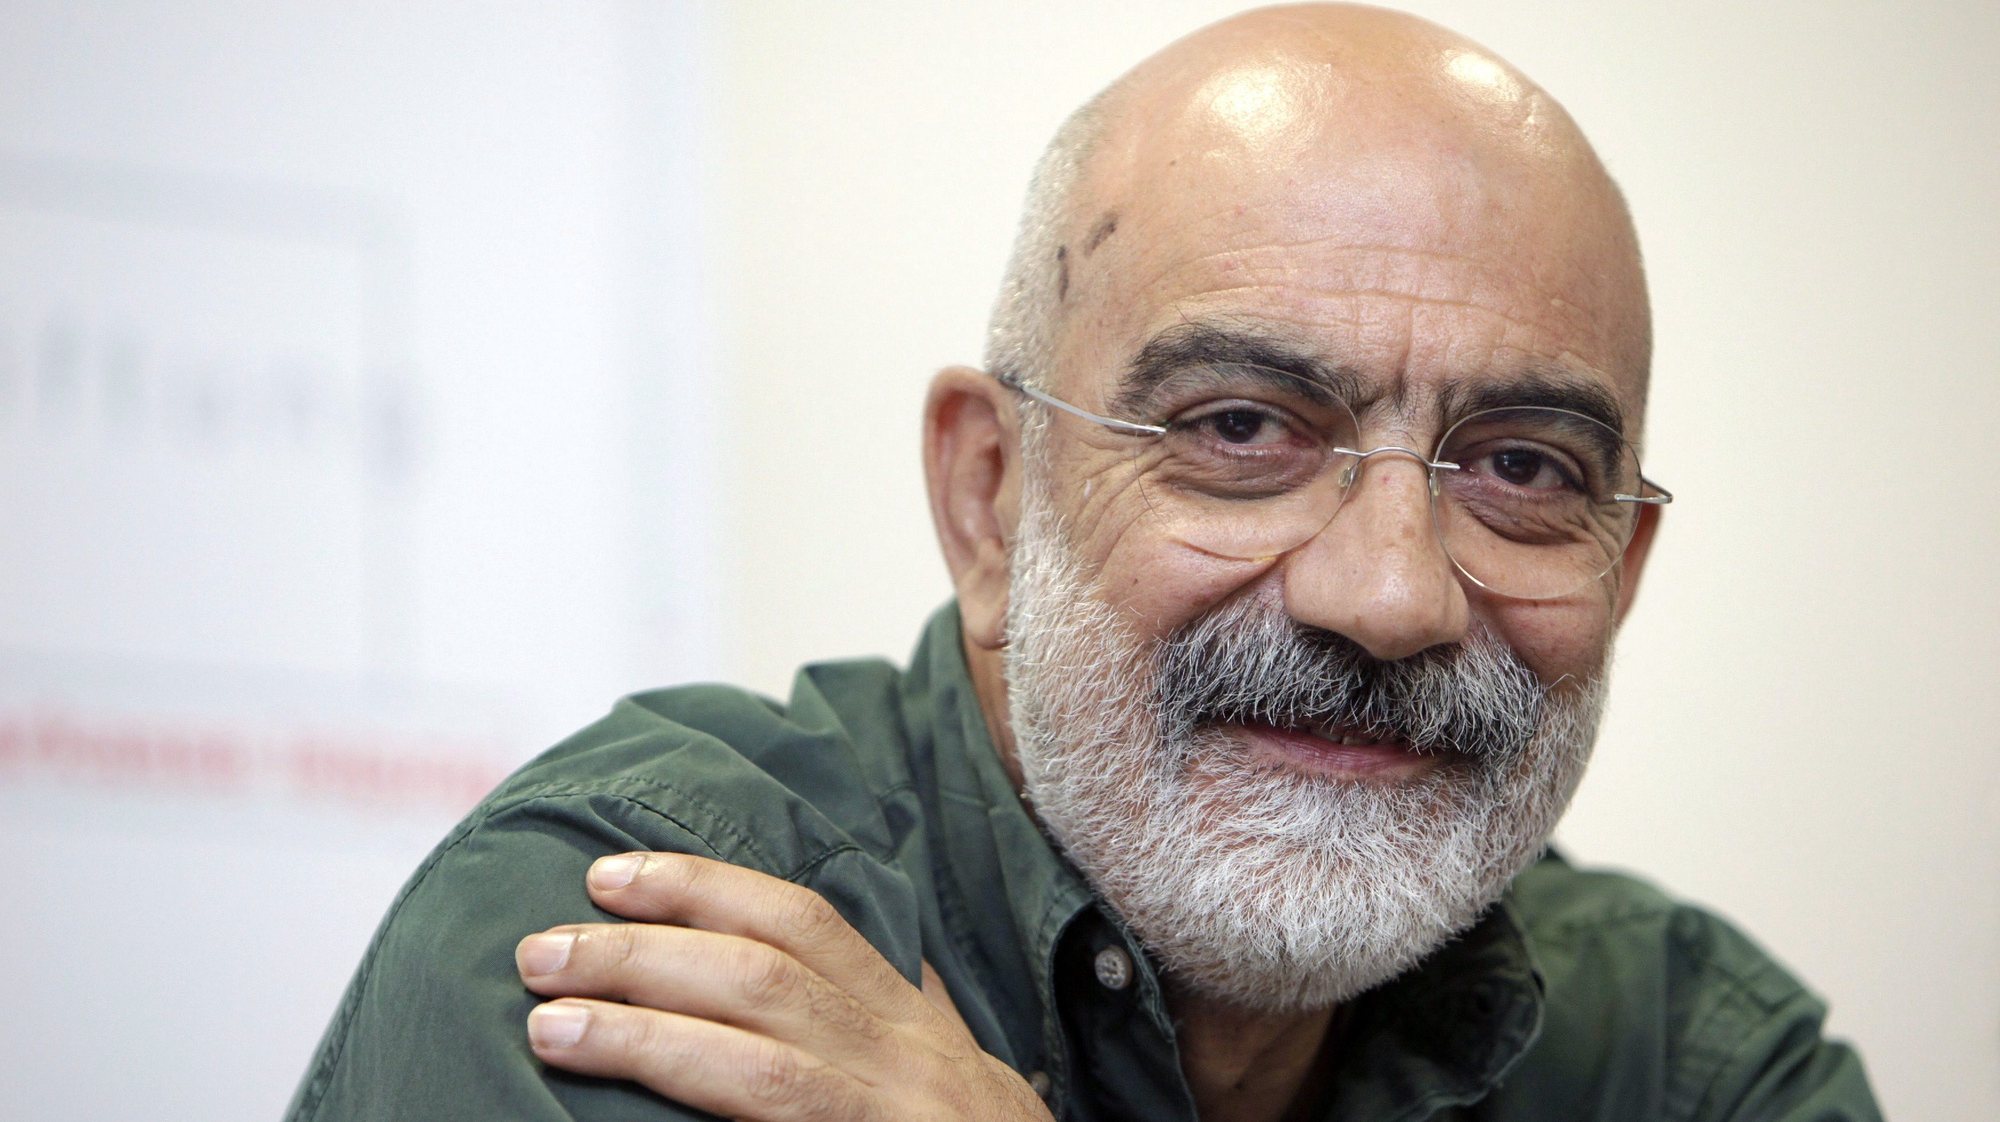 epa01890659 Turkish journalist Ahmet Altan attends a press conference of the Leipzig Media Award 2009 ceremony in Leipzig, Germany, 08 October 2009. Laureate Altan is the chief editor of the newspaper &#039;Taraf&#039; that published critical reports about the Turkish military. The Leipzig Media Award is endowed with 30,000 euros.  EPA/JAN WOITAS